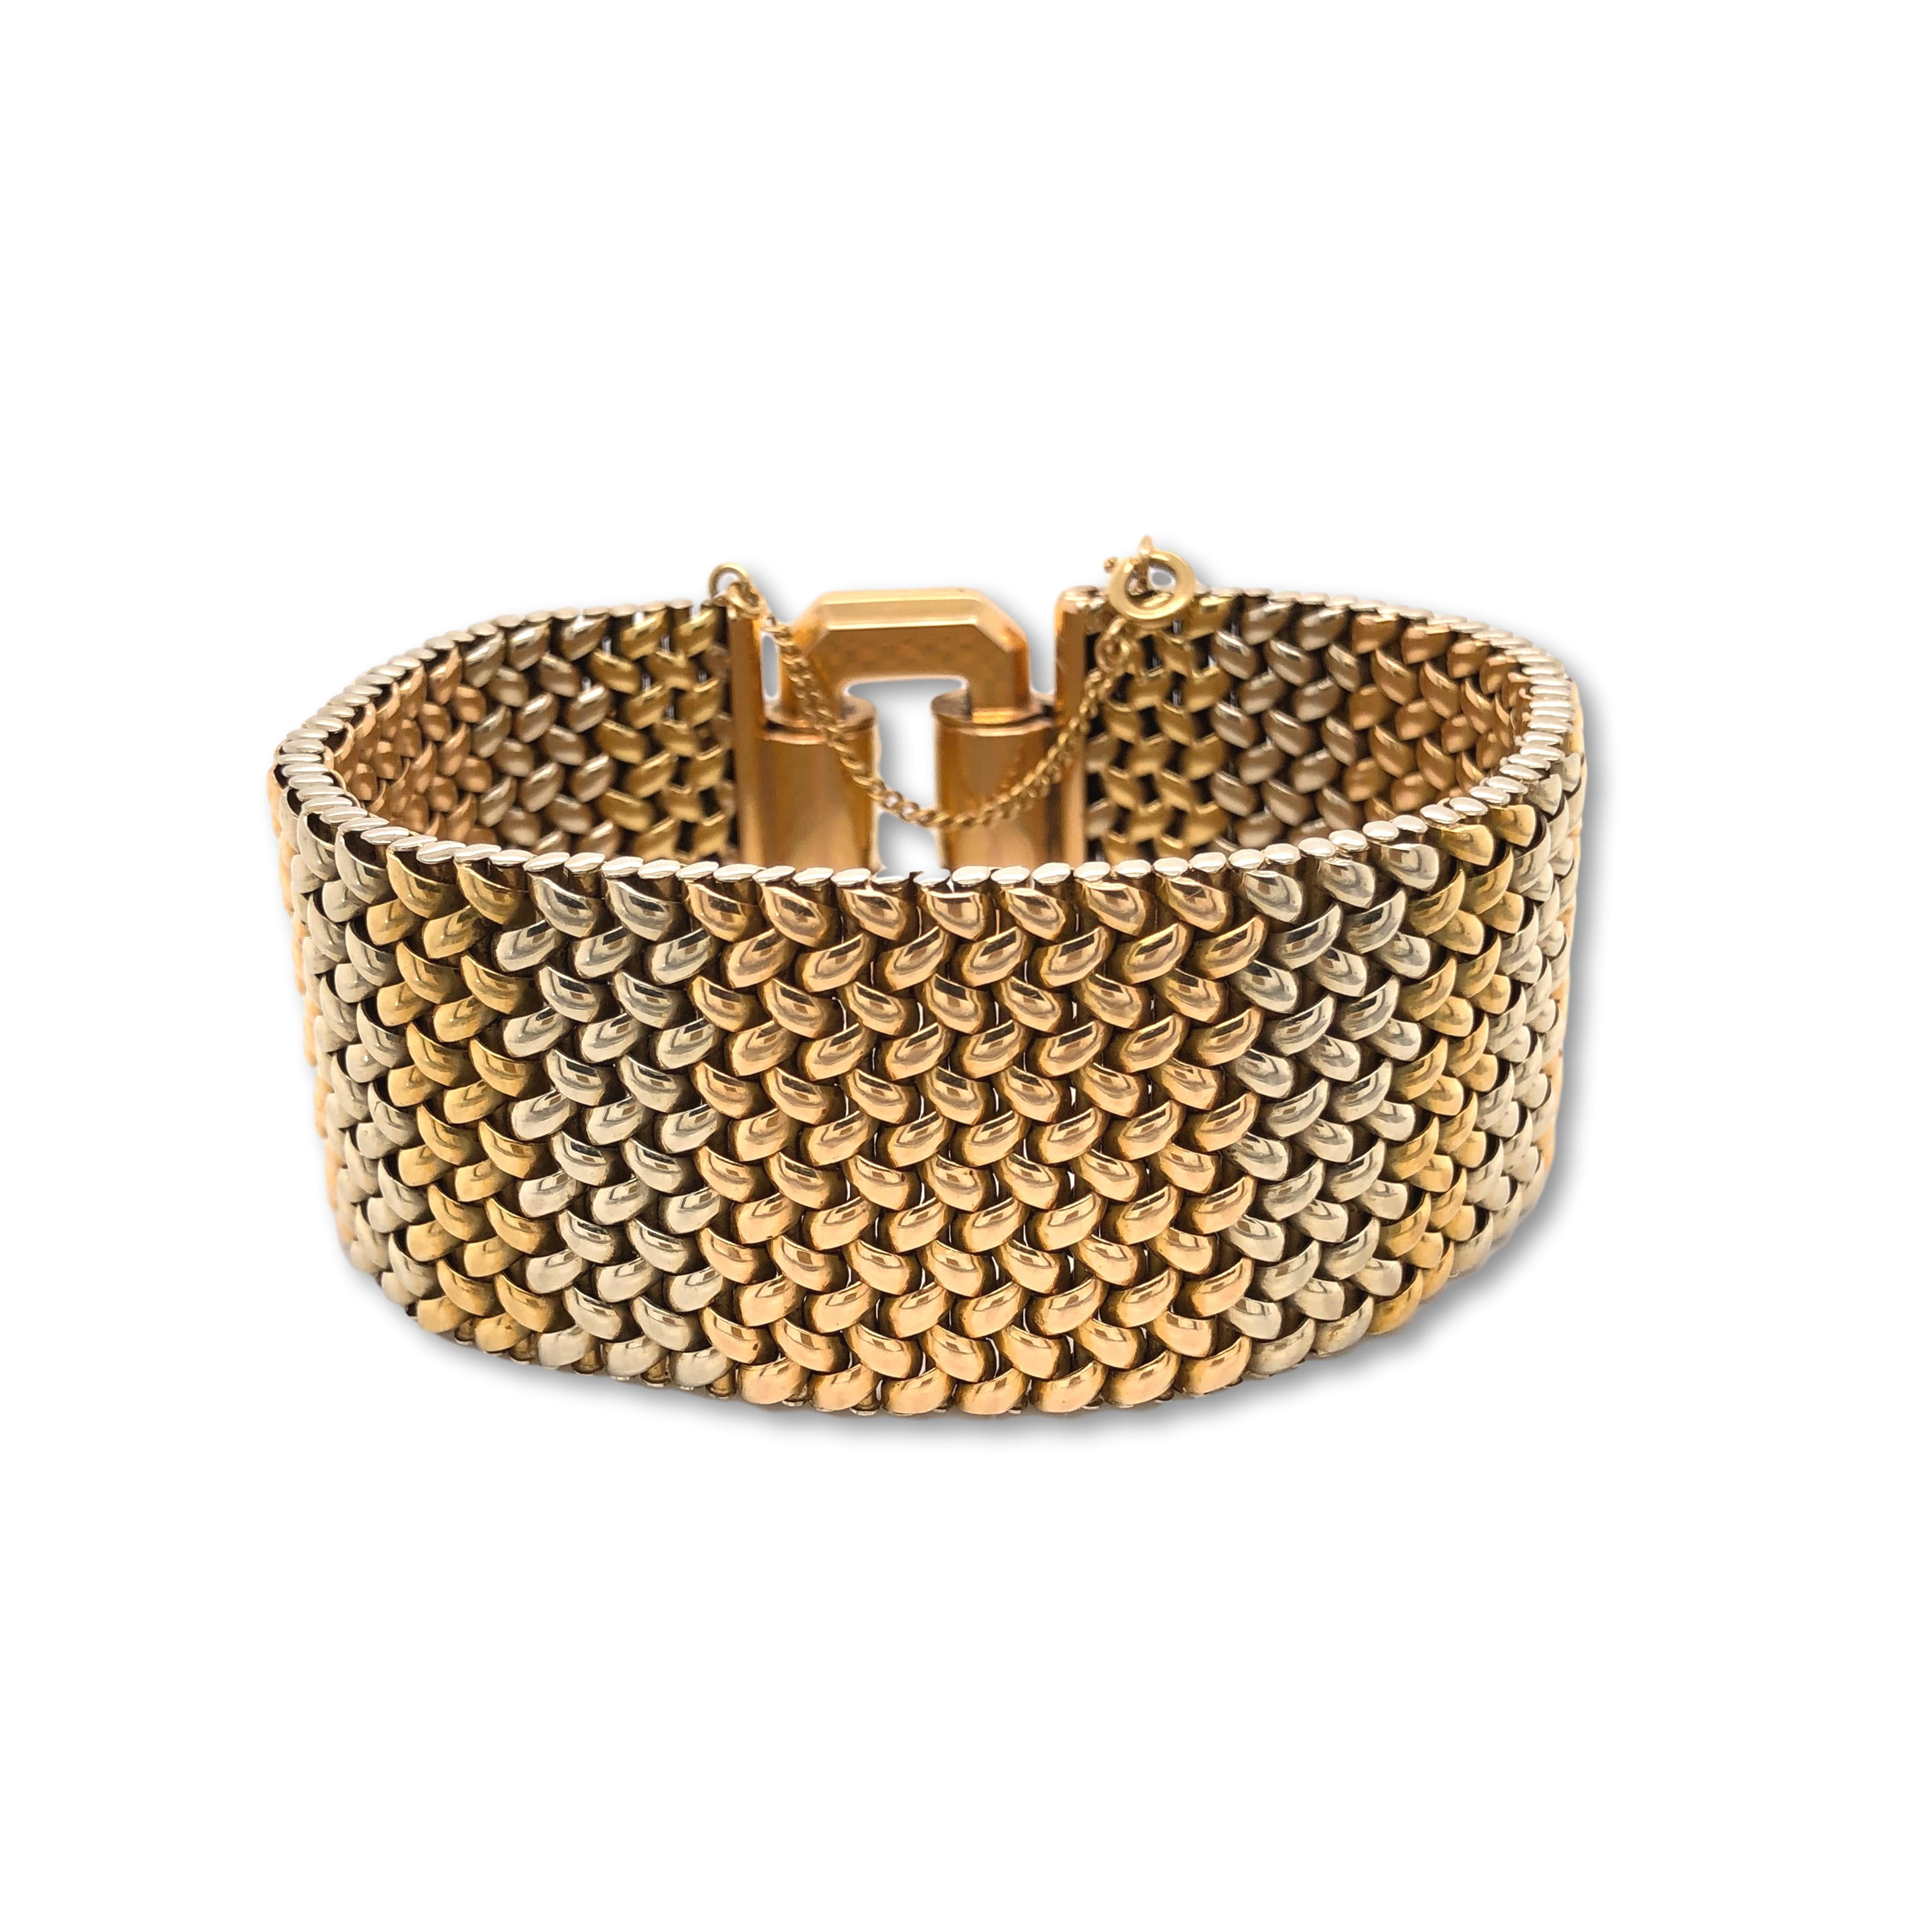 This Flexible Tri-Colored Gold Bracelet is of Italian Design and weighs 121.9 grams and measures 8 inches in length 